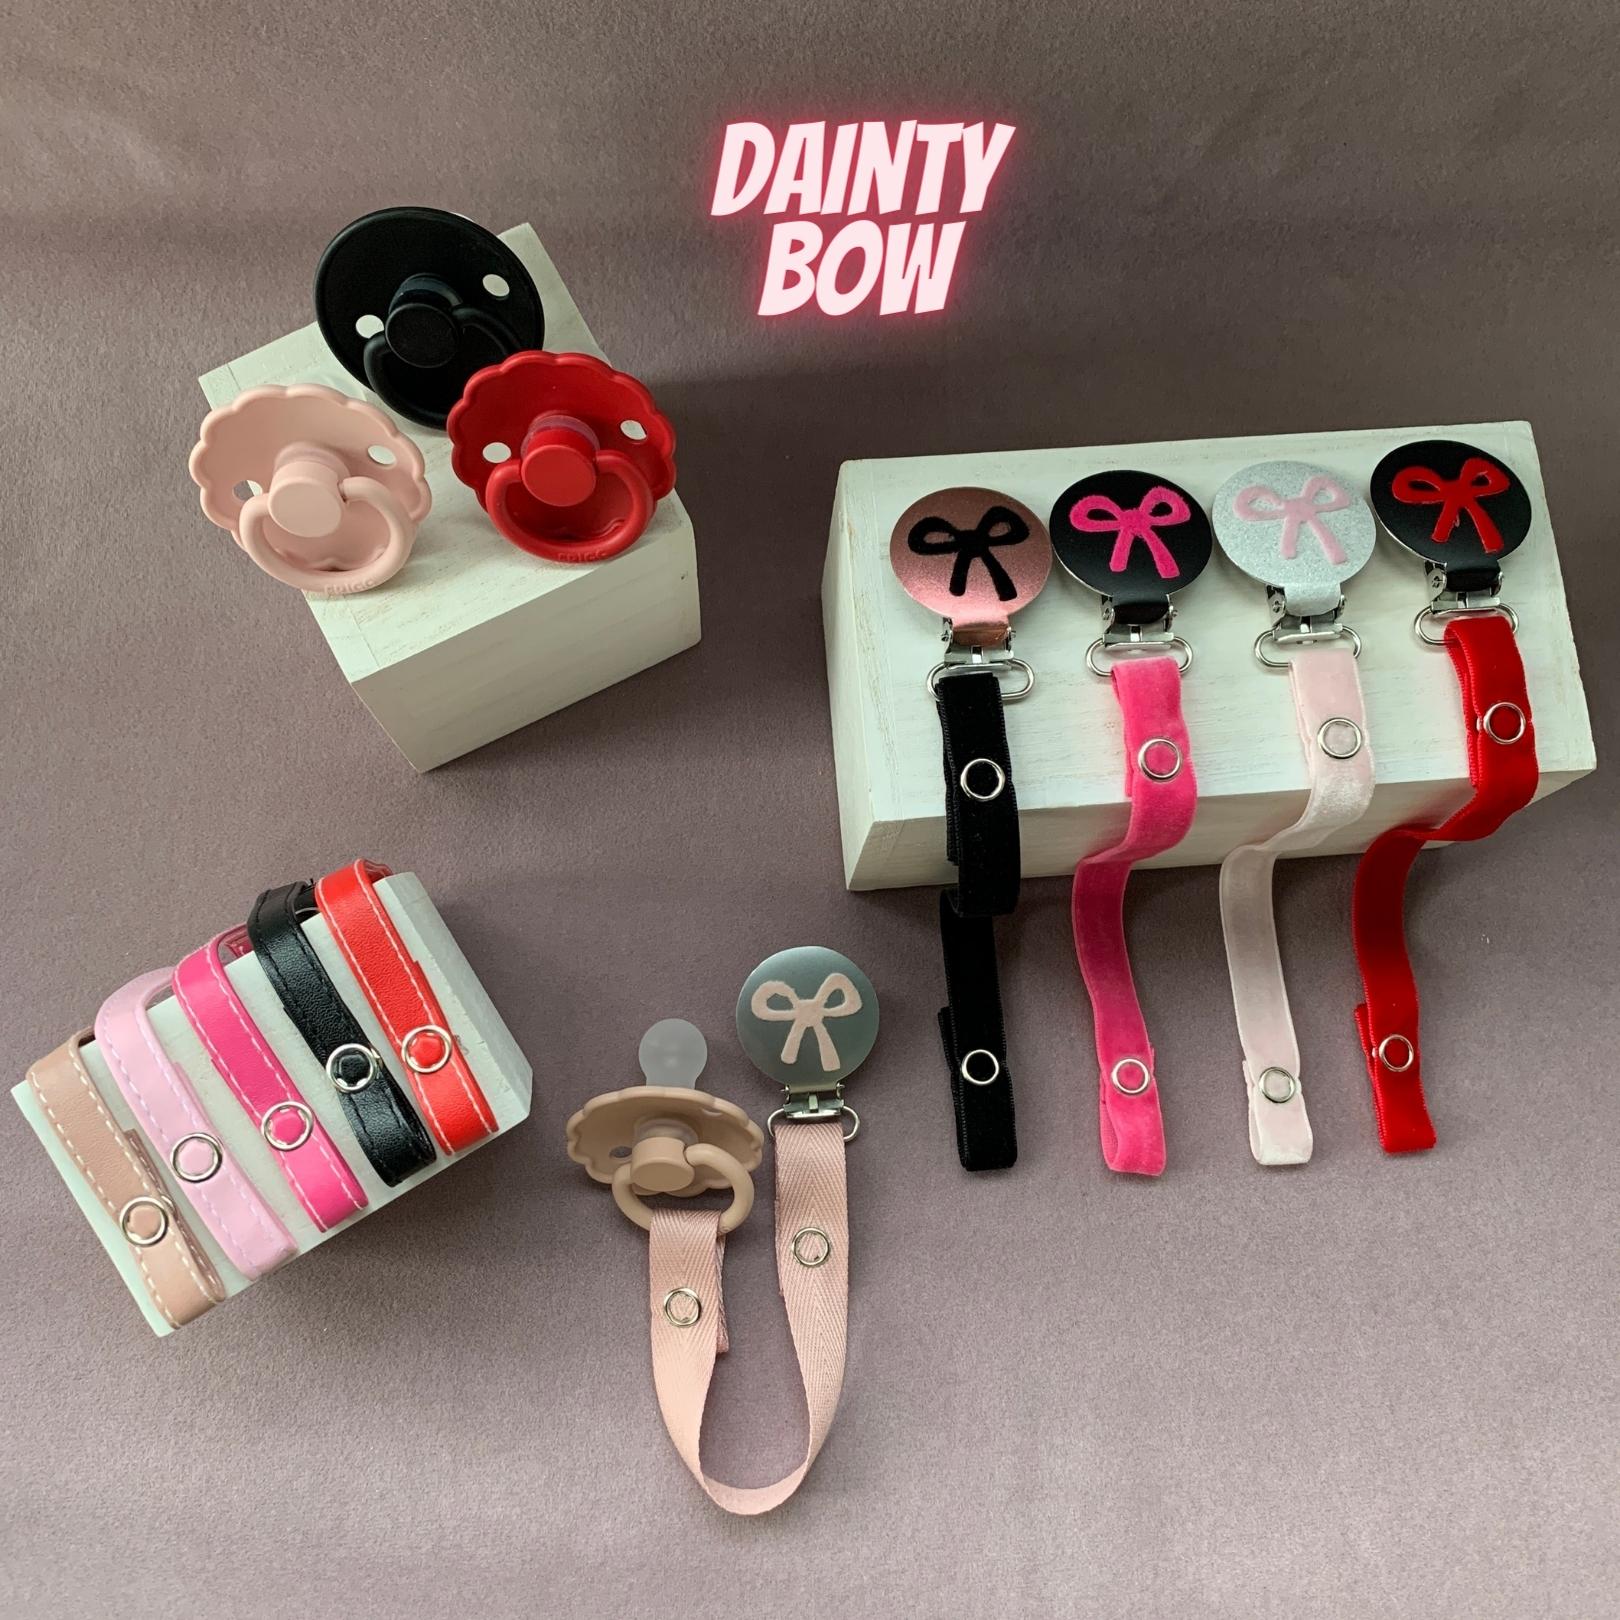 Classy Paci Dainty Bow Collection FW23 Velvet/Leather